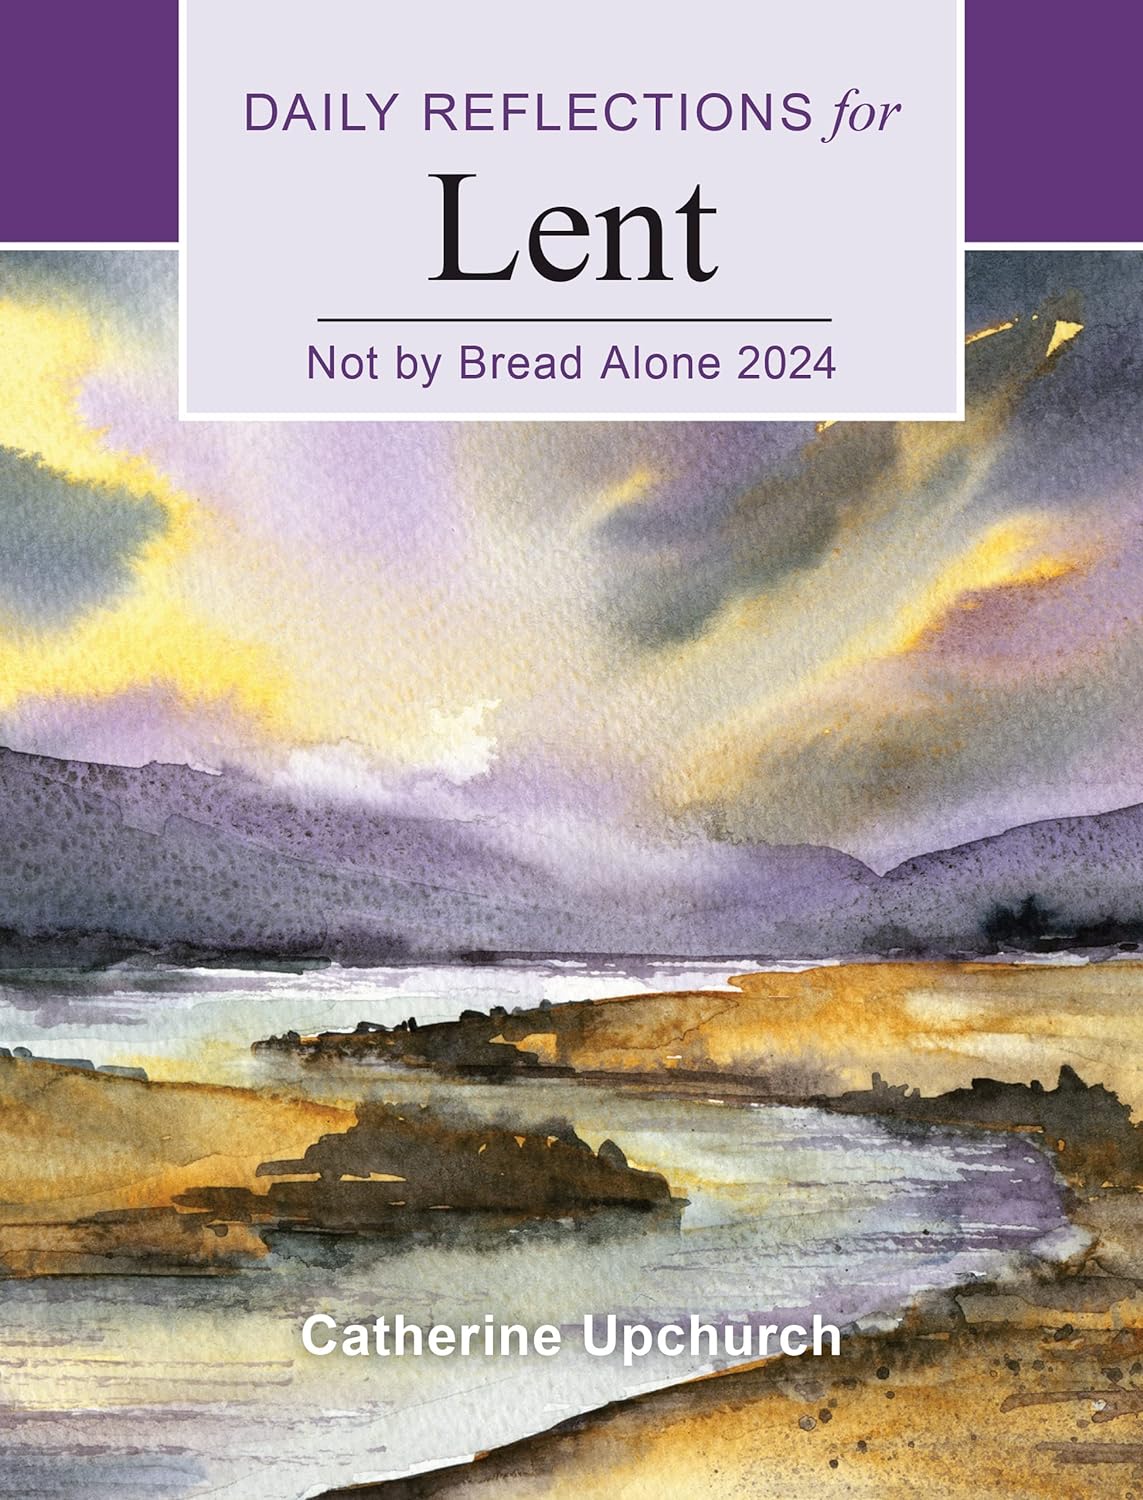 Not by Bread Alone Lent 2024